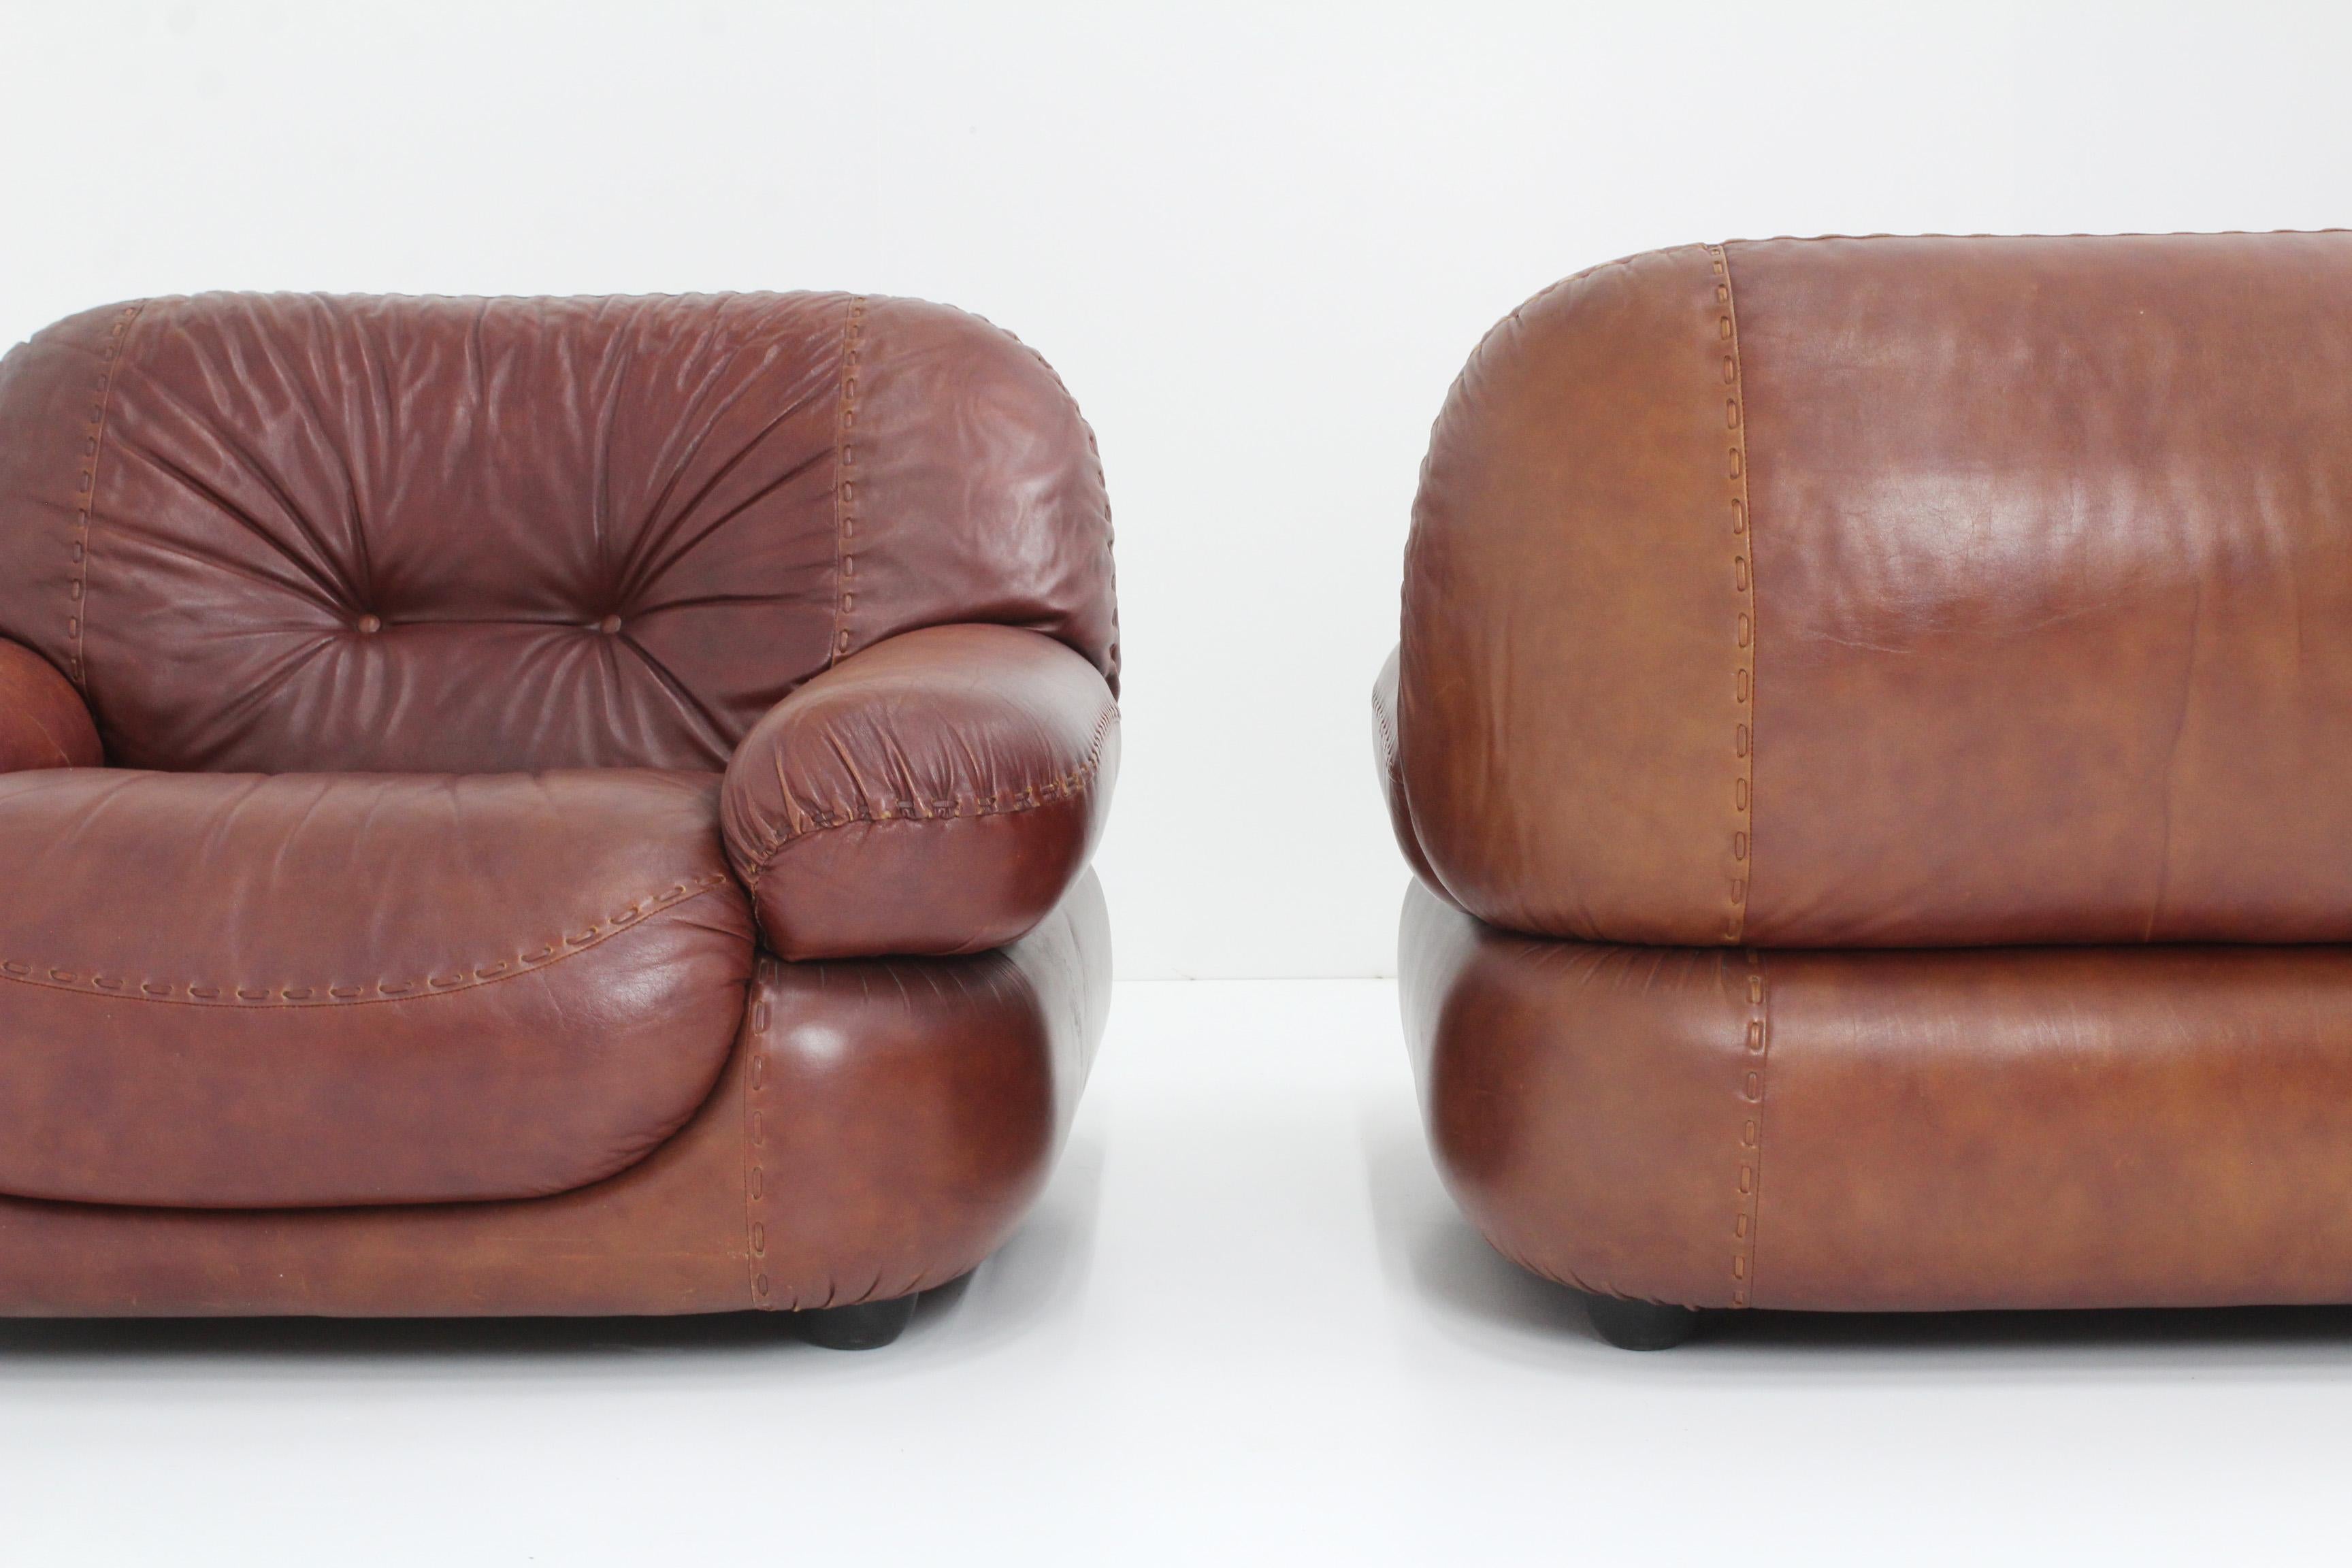 A set of 2 Italian Lounge Chairs in Leather designed by Sapporo for Mobil Girgi in the 1970s. The chairs are extremly comfortable and well designed, high quality italian design. Original burgundy brown leather upholstery, beautiful patina. The seats